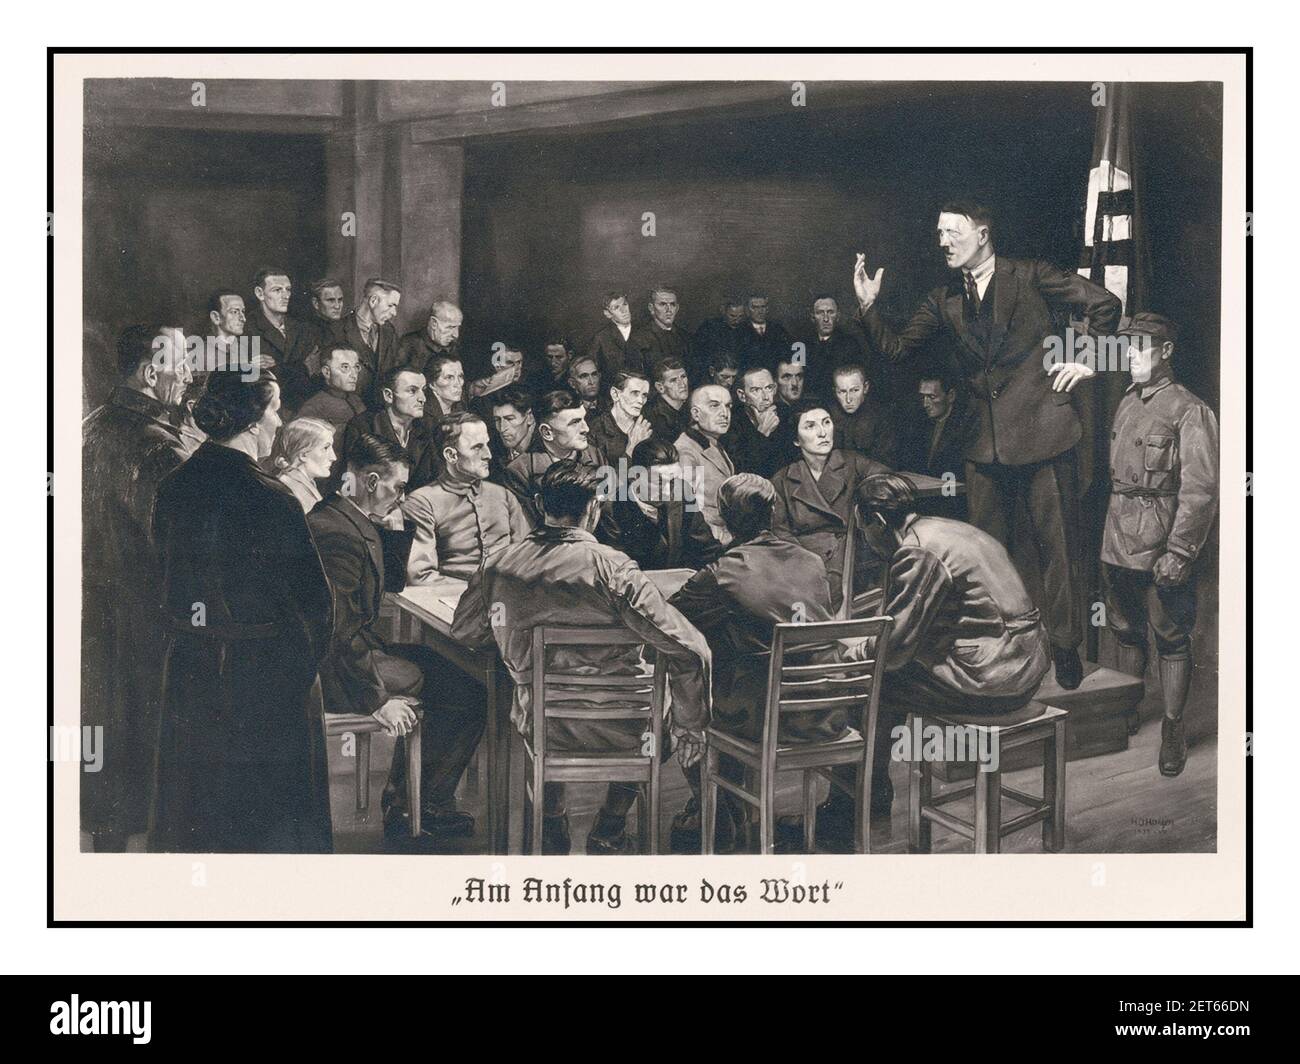 1930's Adolf Hitler & Nazi Swastika Flag early propaganda photo derived poster illustration with small group of supporters with titile 'In the beginning was the Word' (am anfang war das wort) Nazi propaganda card Munich Germany Stock Photo